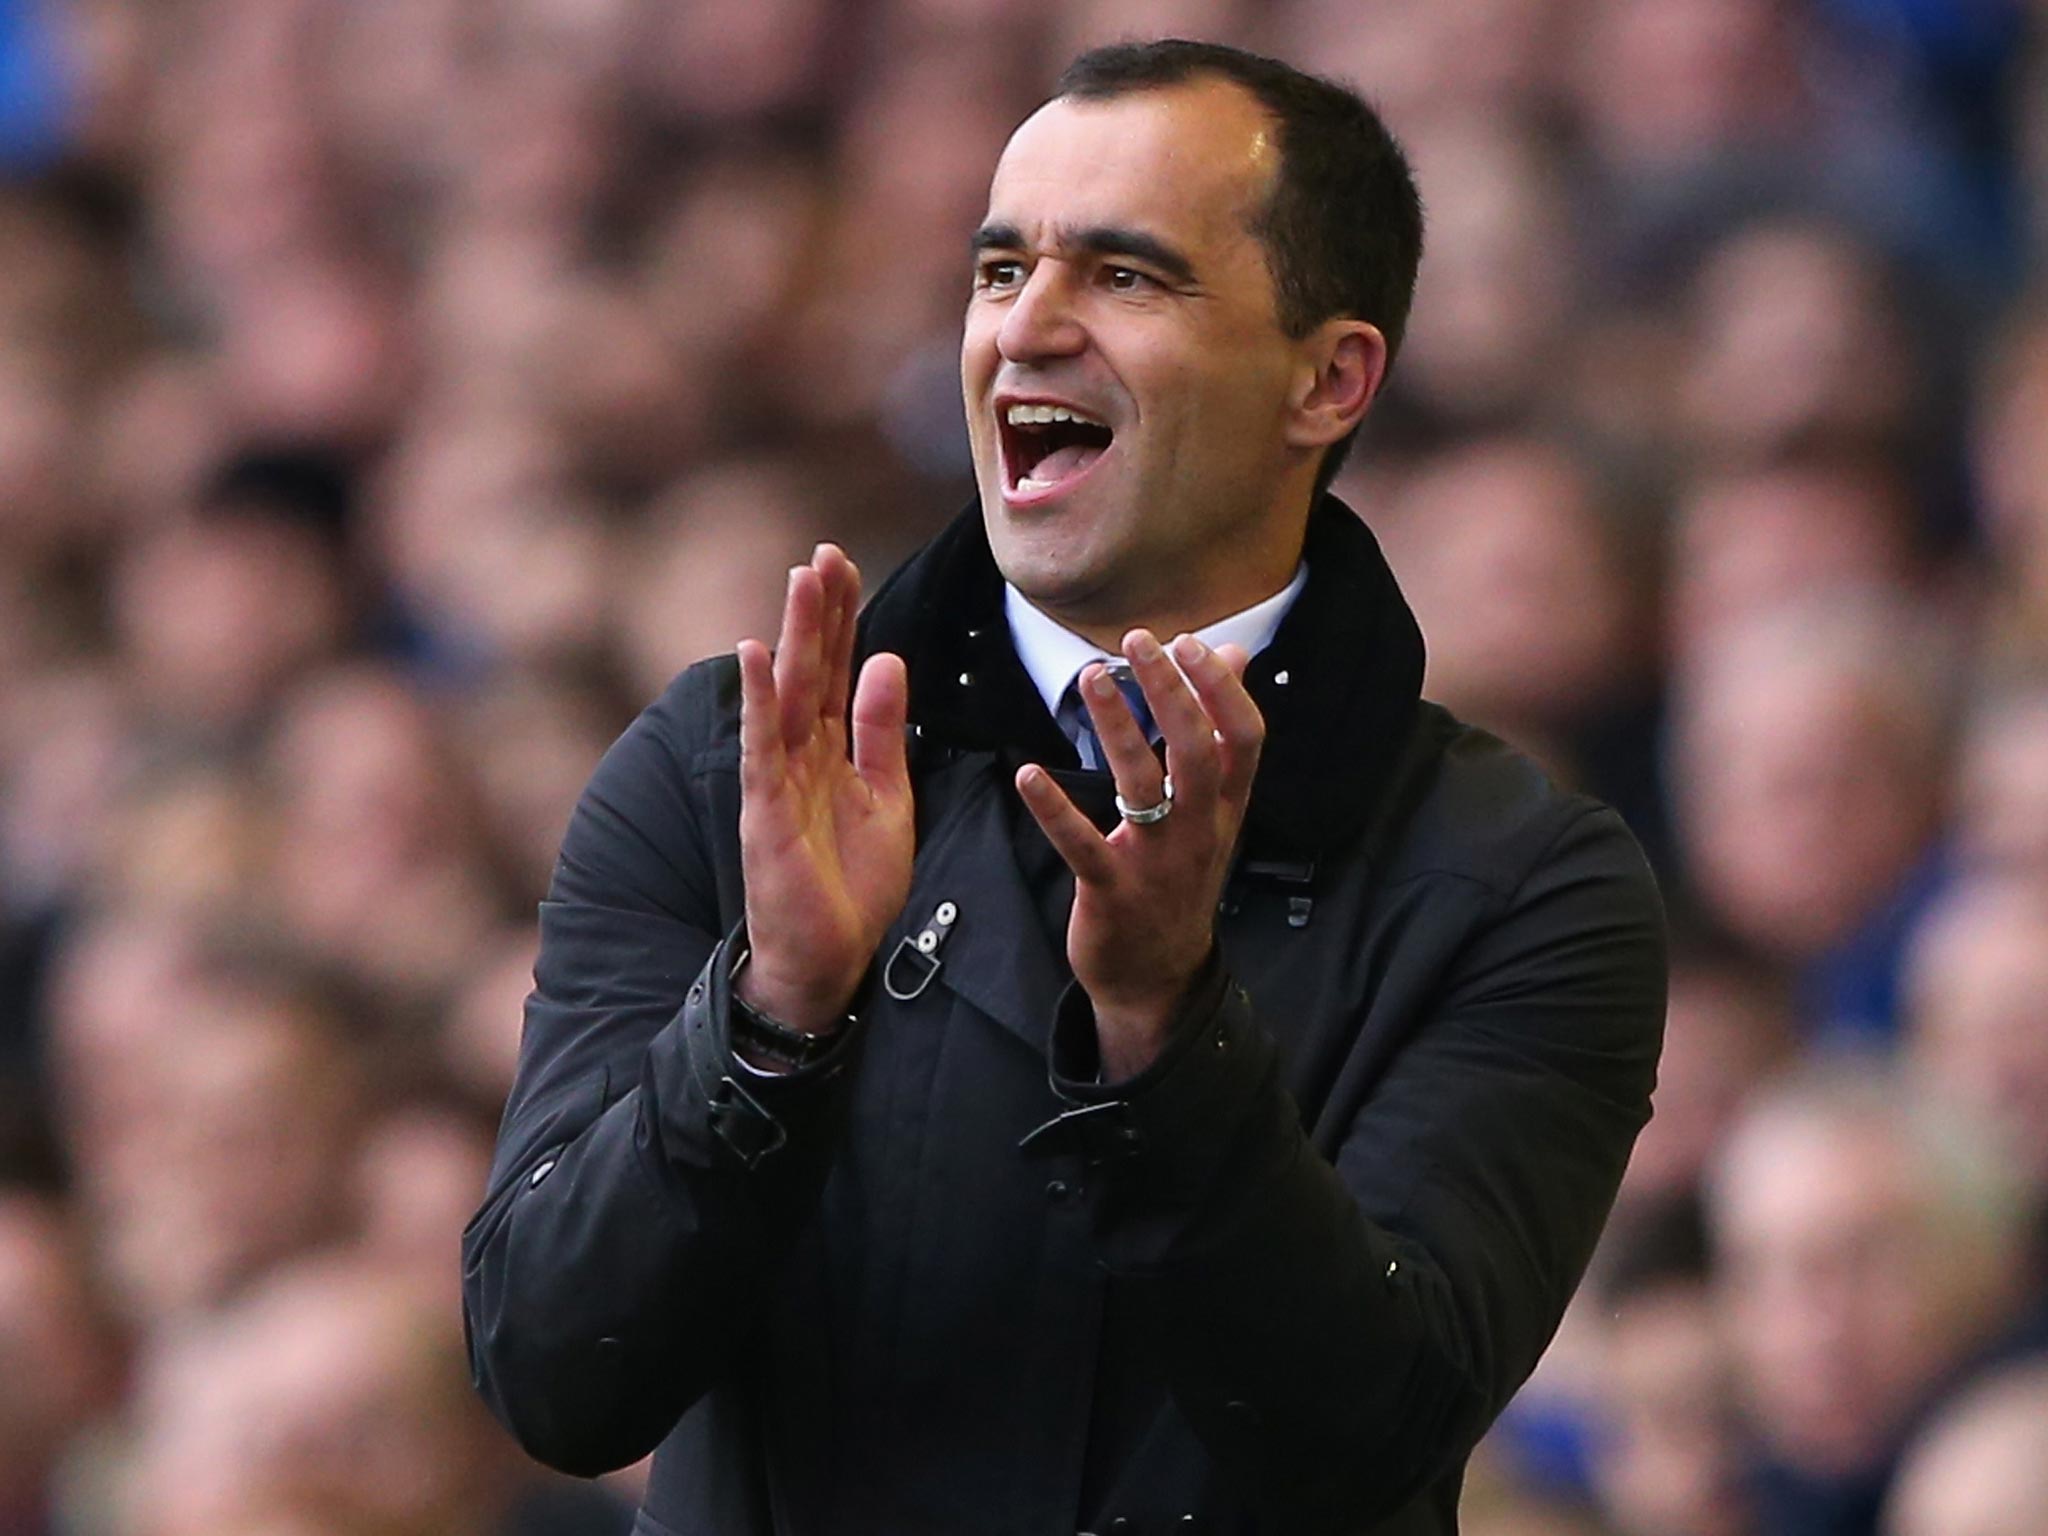 Roberto Martinez appears delighted as Everton score in the 3-0 victory over Arsenal